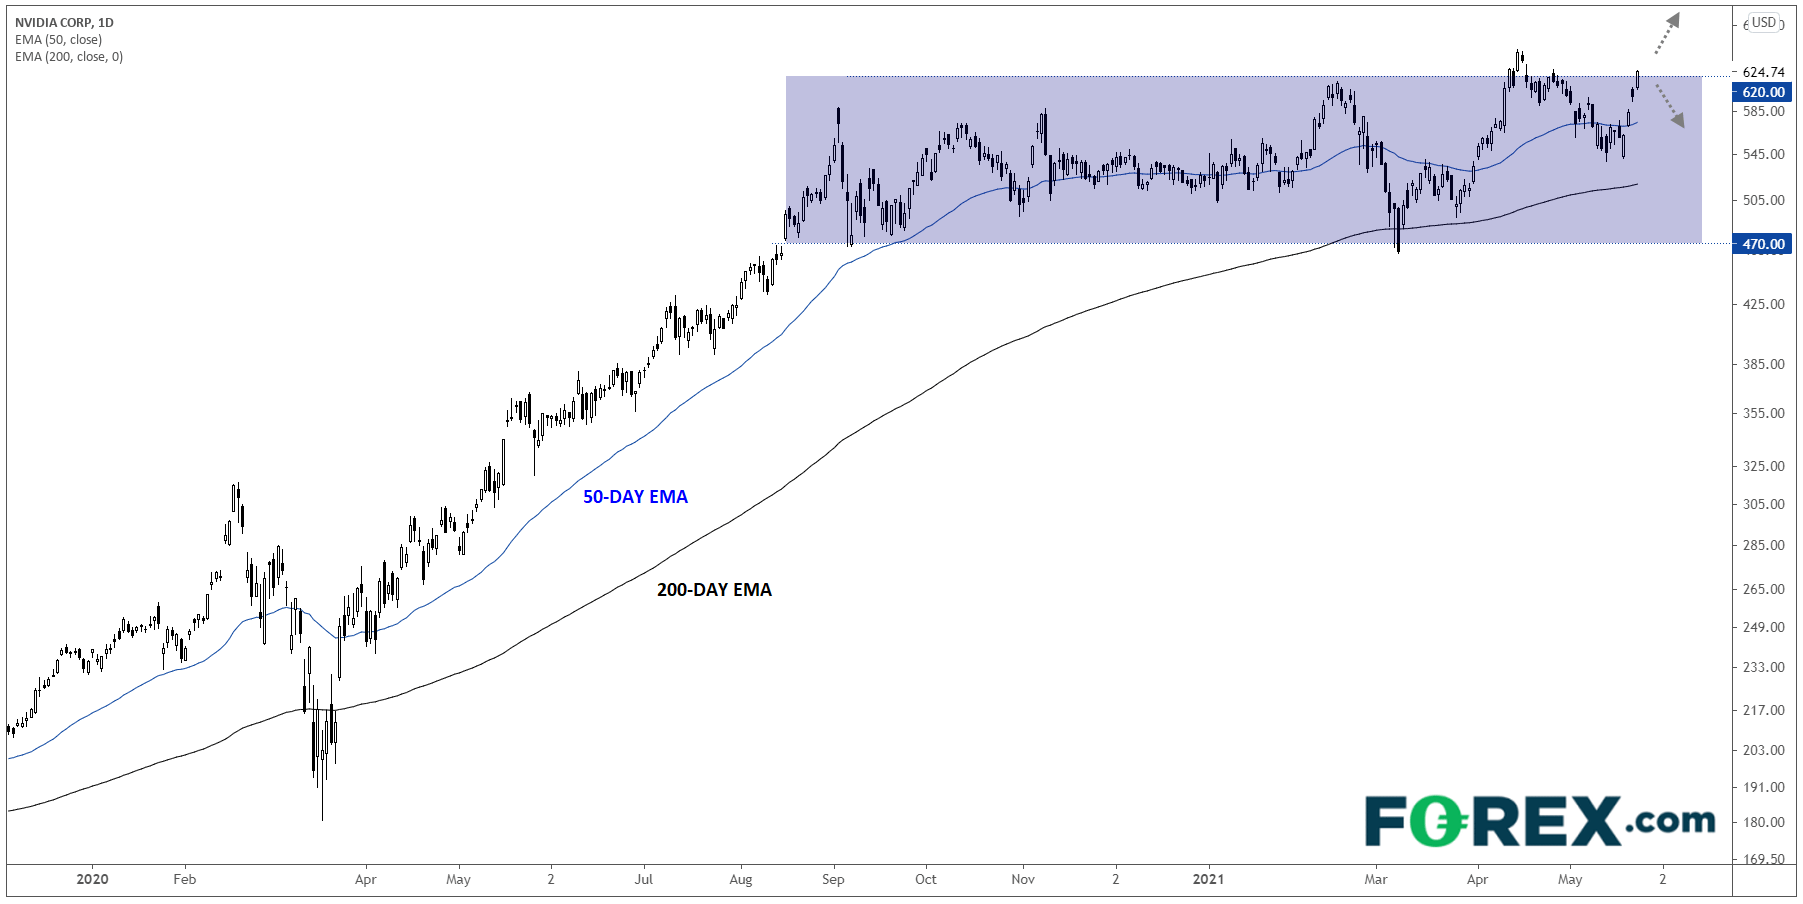 Chart analysis shows Nvidia Nada Q1 Earnings Preview . Published in May 2021 by FOREX.com